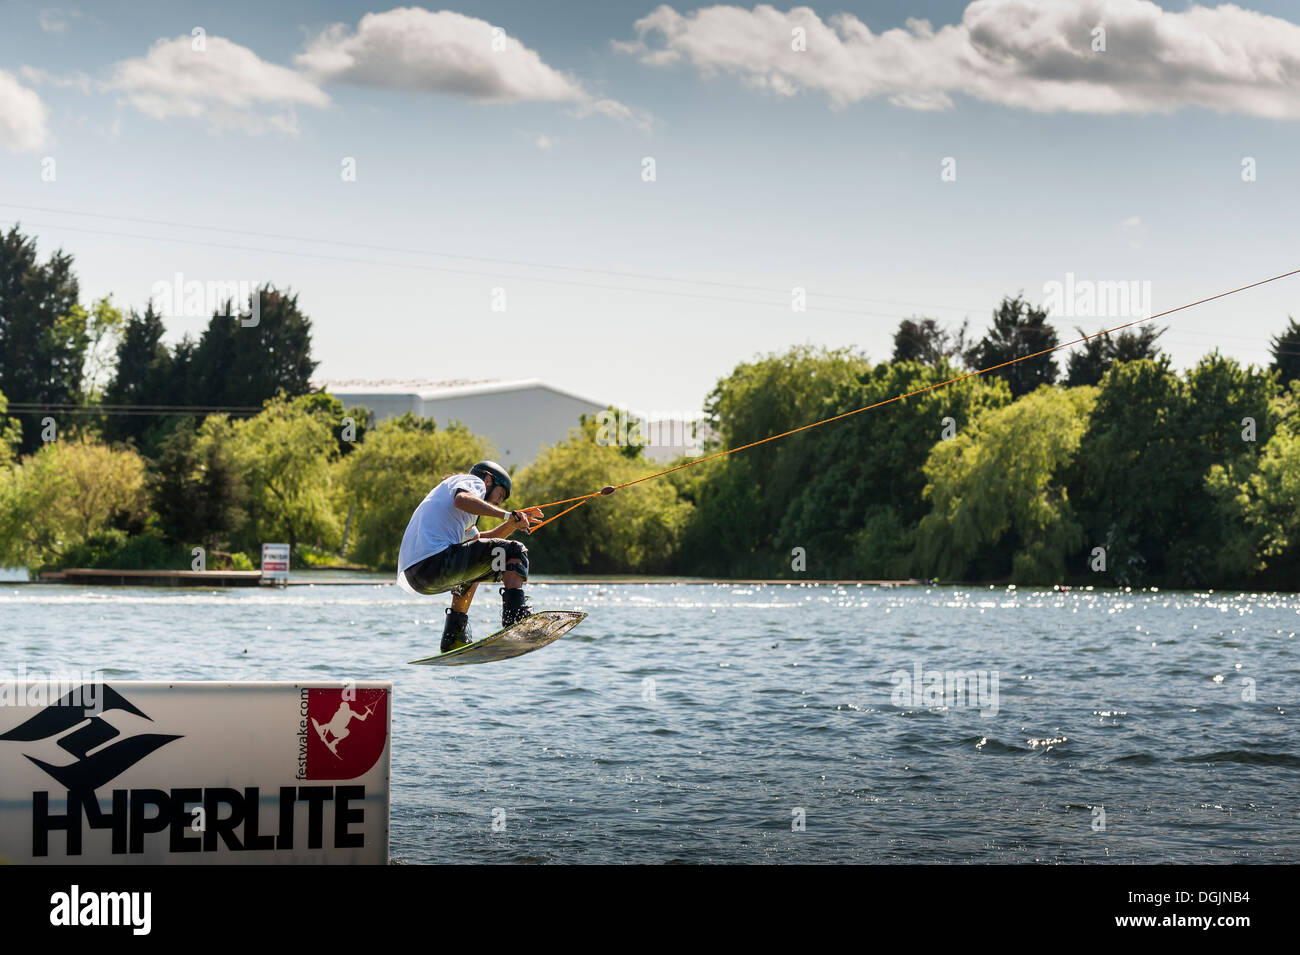 Wakeboarding at the Basildon Festival Wakeboard Park in Essex. Stock Photo